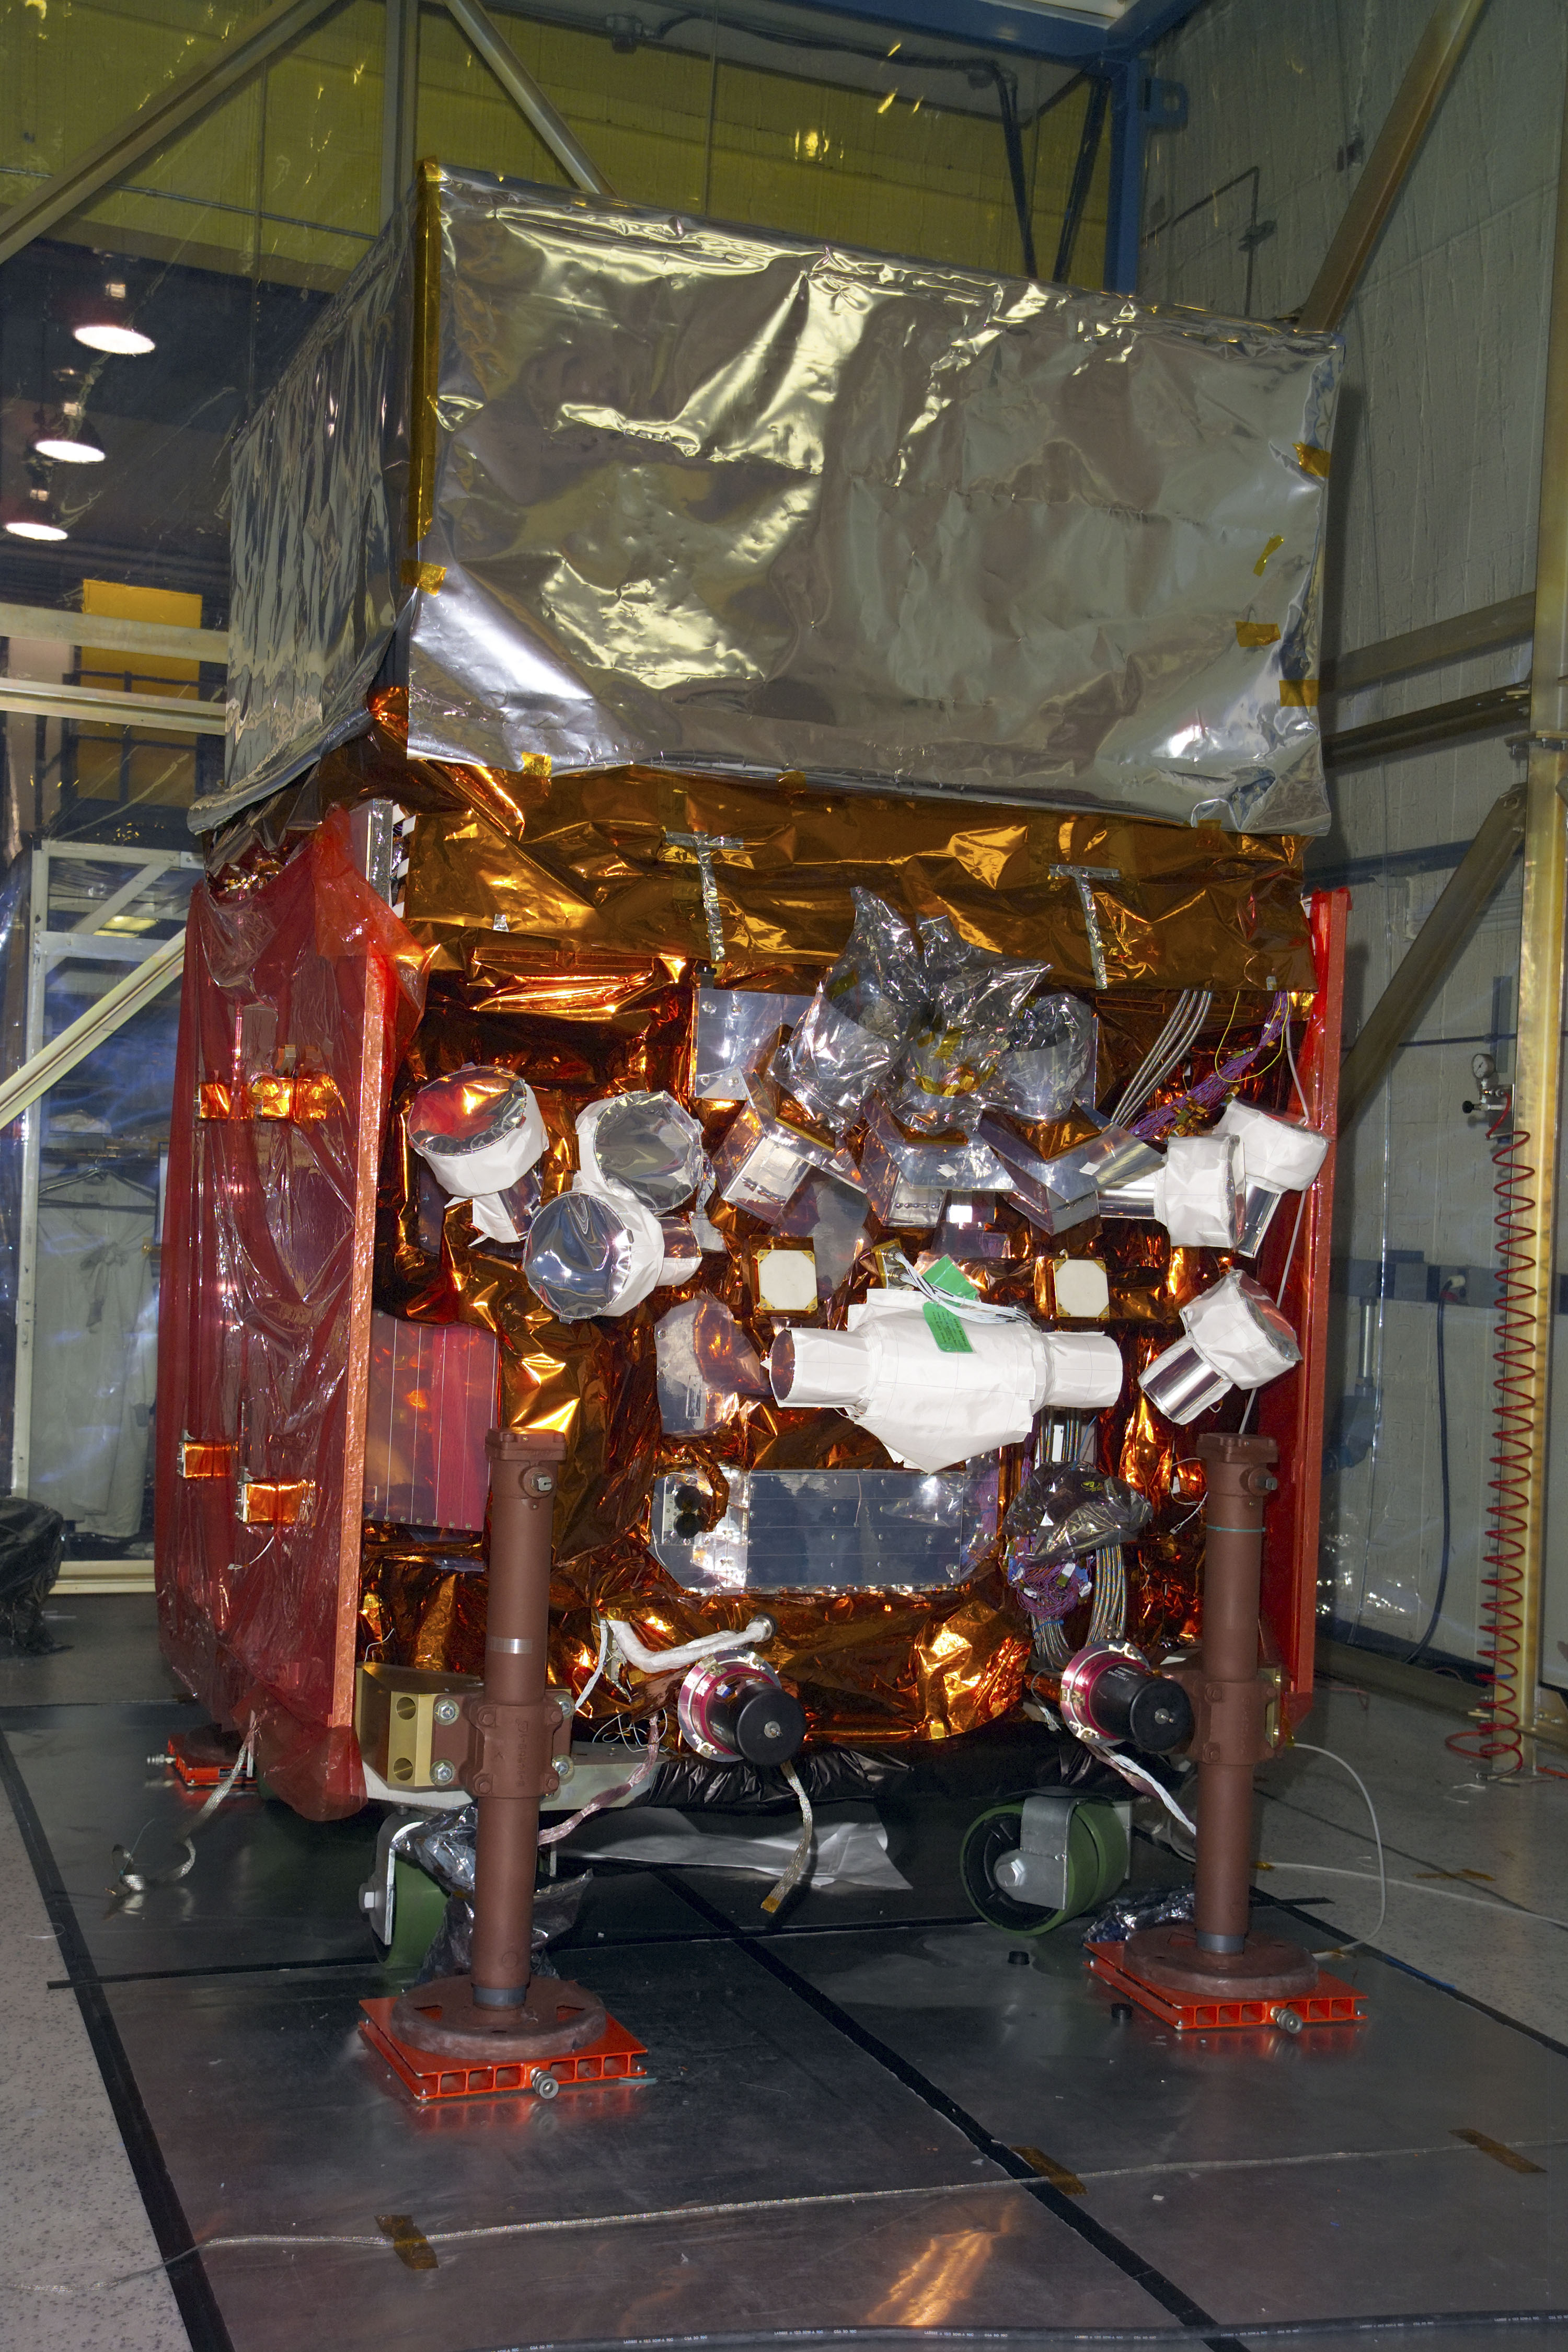 Fermi spacecraft at the Naval Research Lab